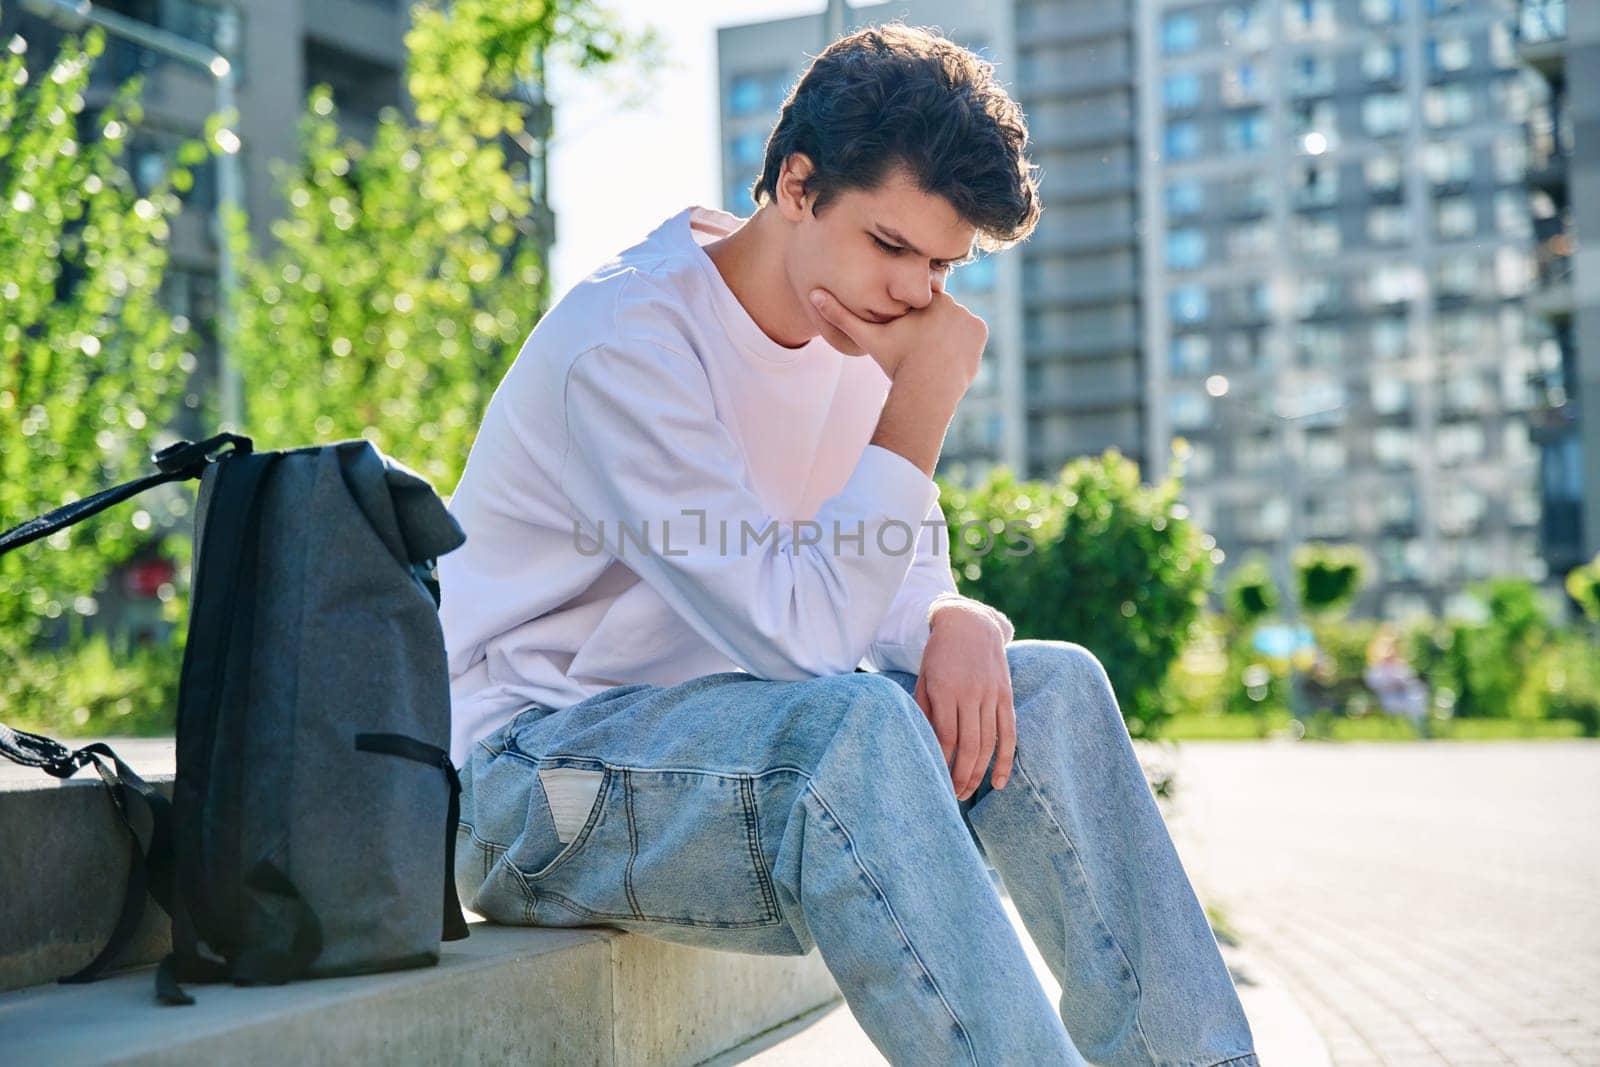 Upset sad unhappy young male sitting outdoor on steps. Guy university college student with backpack sitting, holding head with hands. Problems, difficulties, depression, mental health of young people